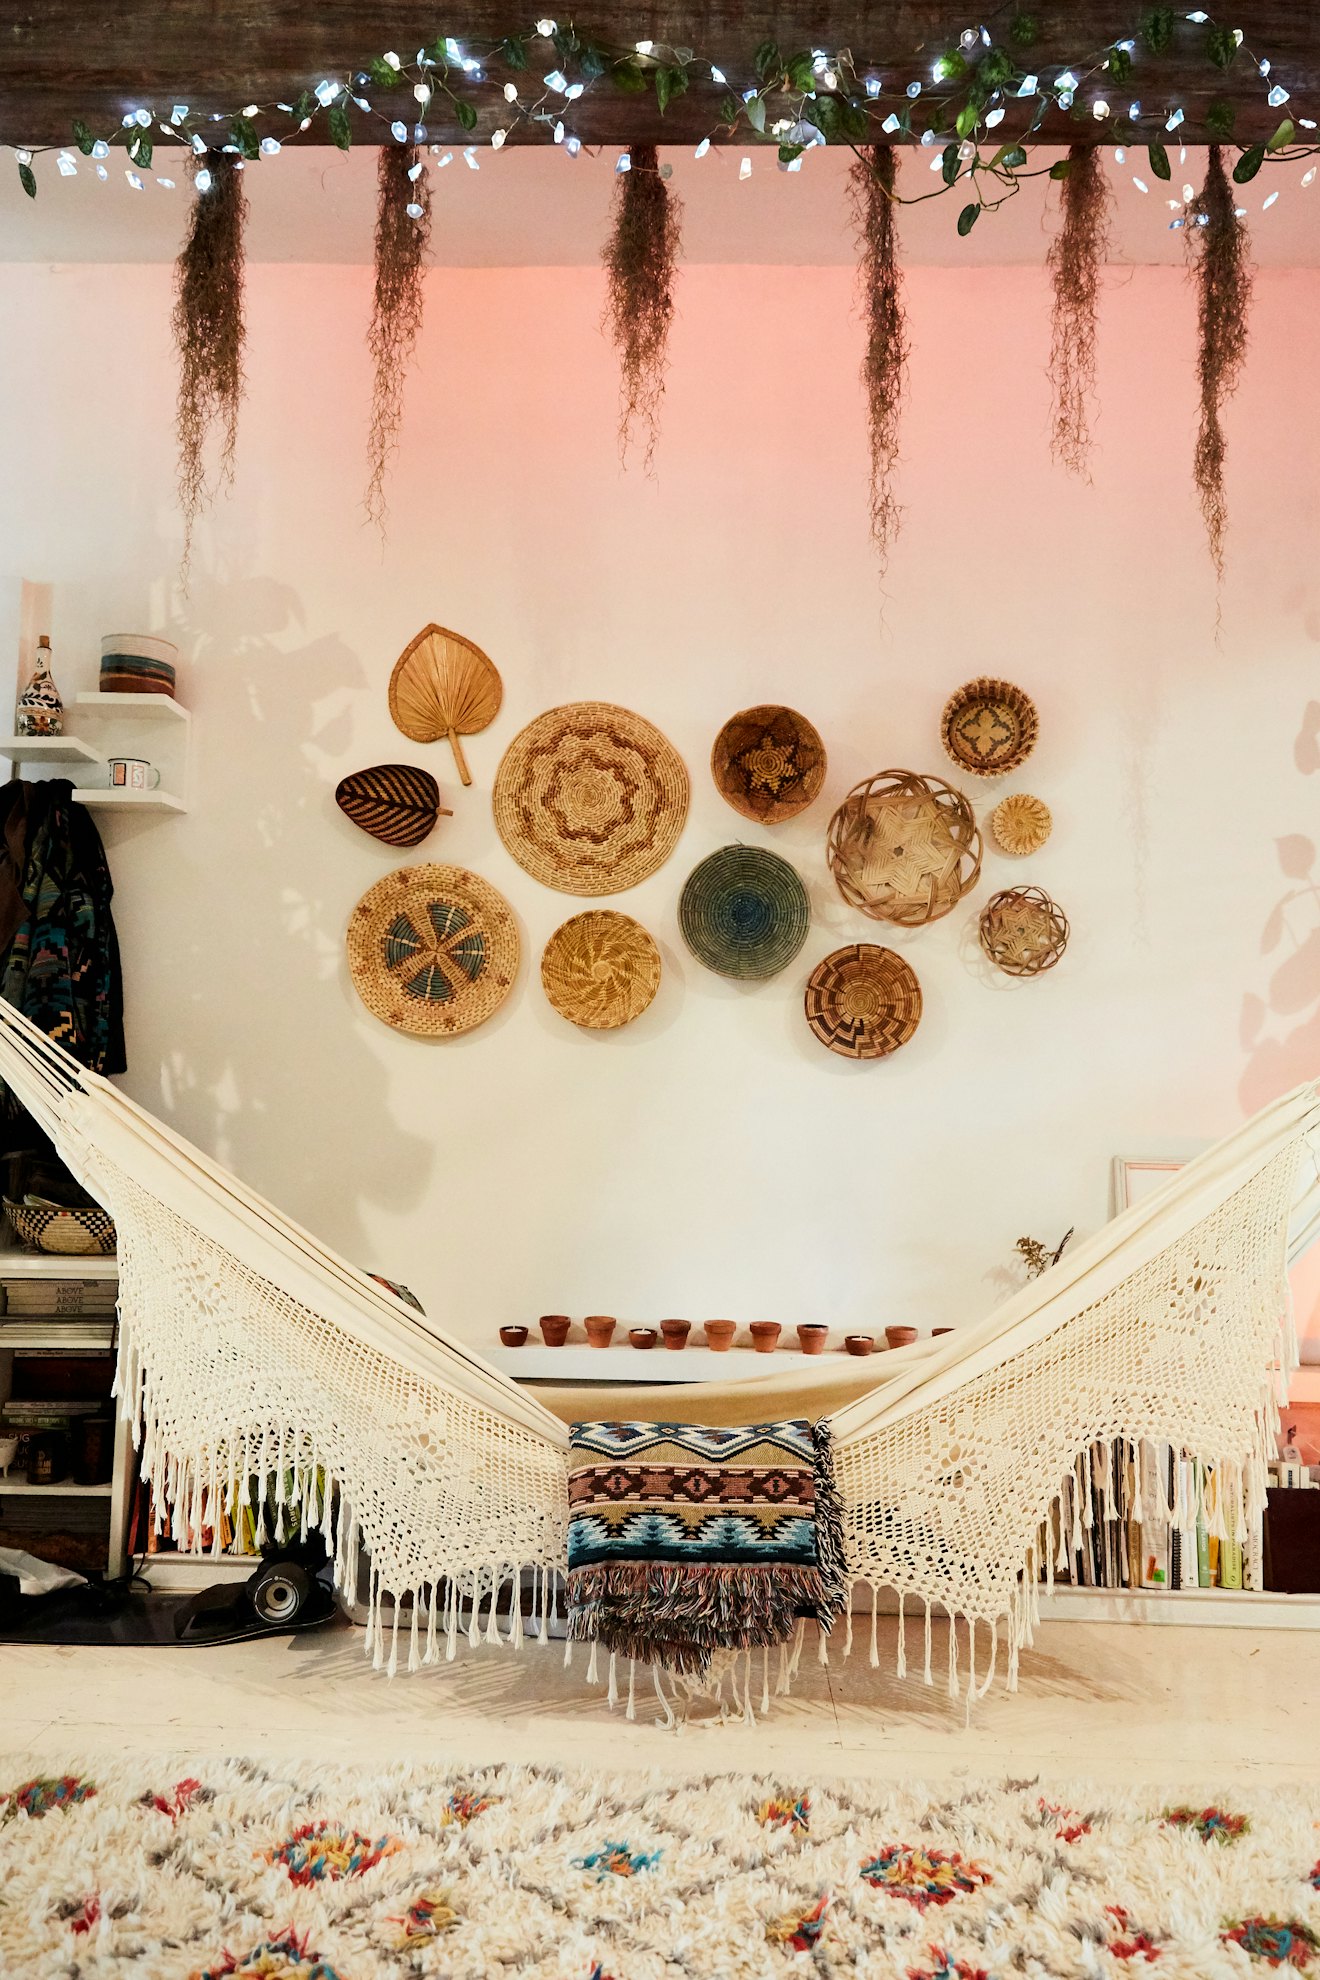 Cotton Ecru Fabric Hammock with a patterned blanket and set of wall baskets in the background